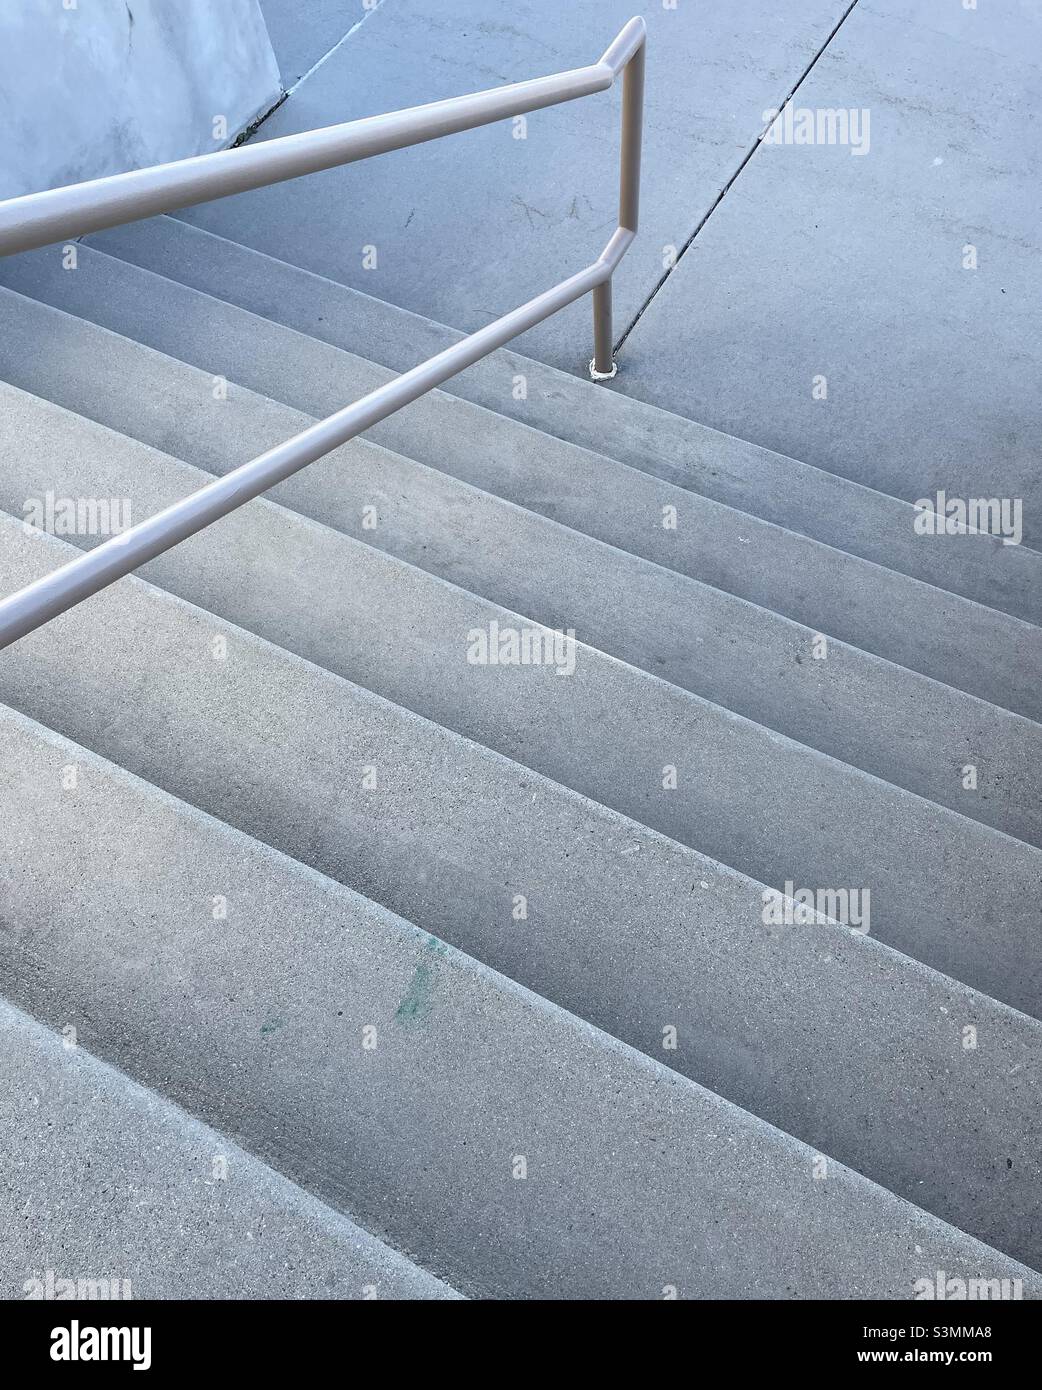 Outdoor cement steps, with a metal handrail in the center, taken at an angle to add some abstract interest. Stock Photo